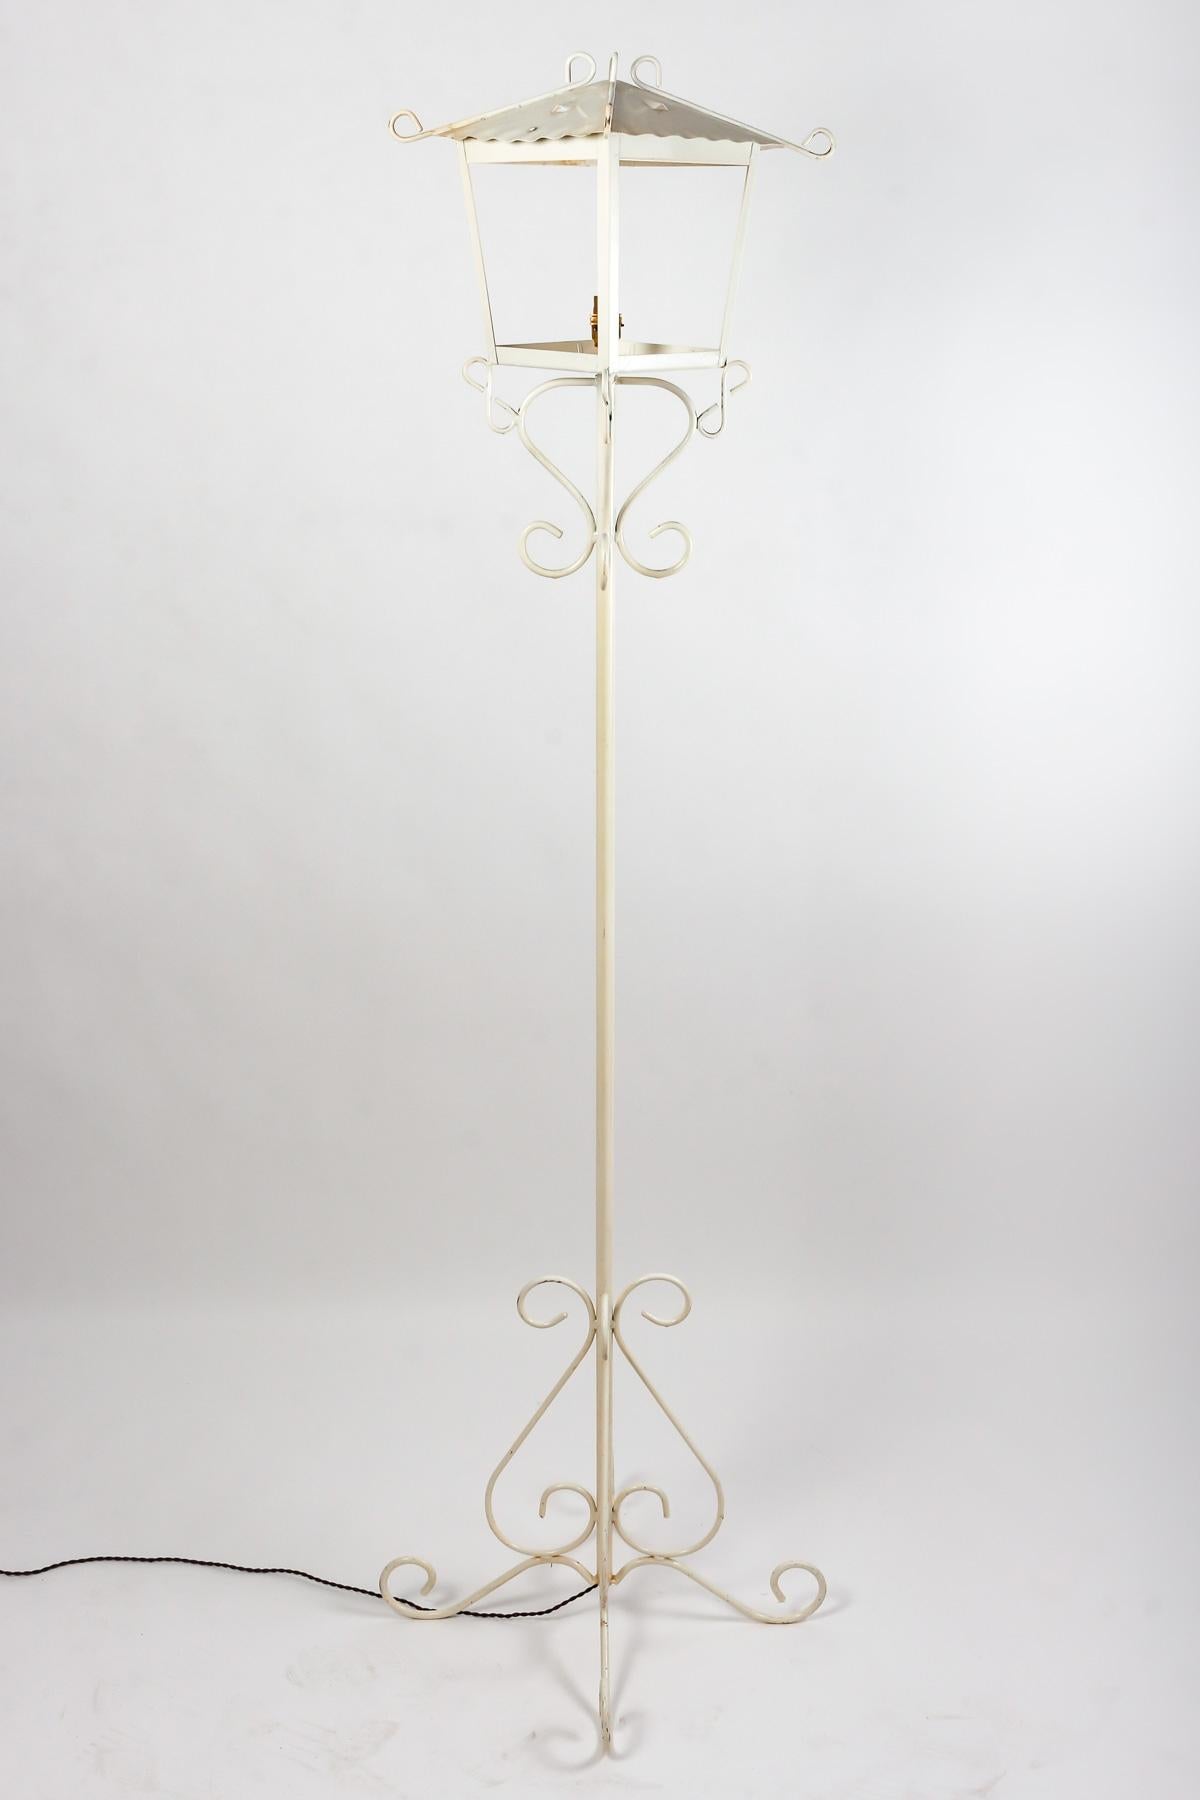 Floor lamp in Painted Wrought Iron by Maison R.Gleizes, 1950-1960 Design. For Sale 2